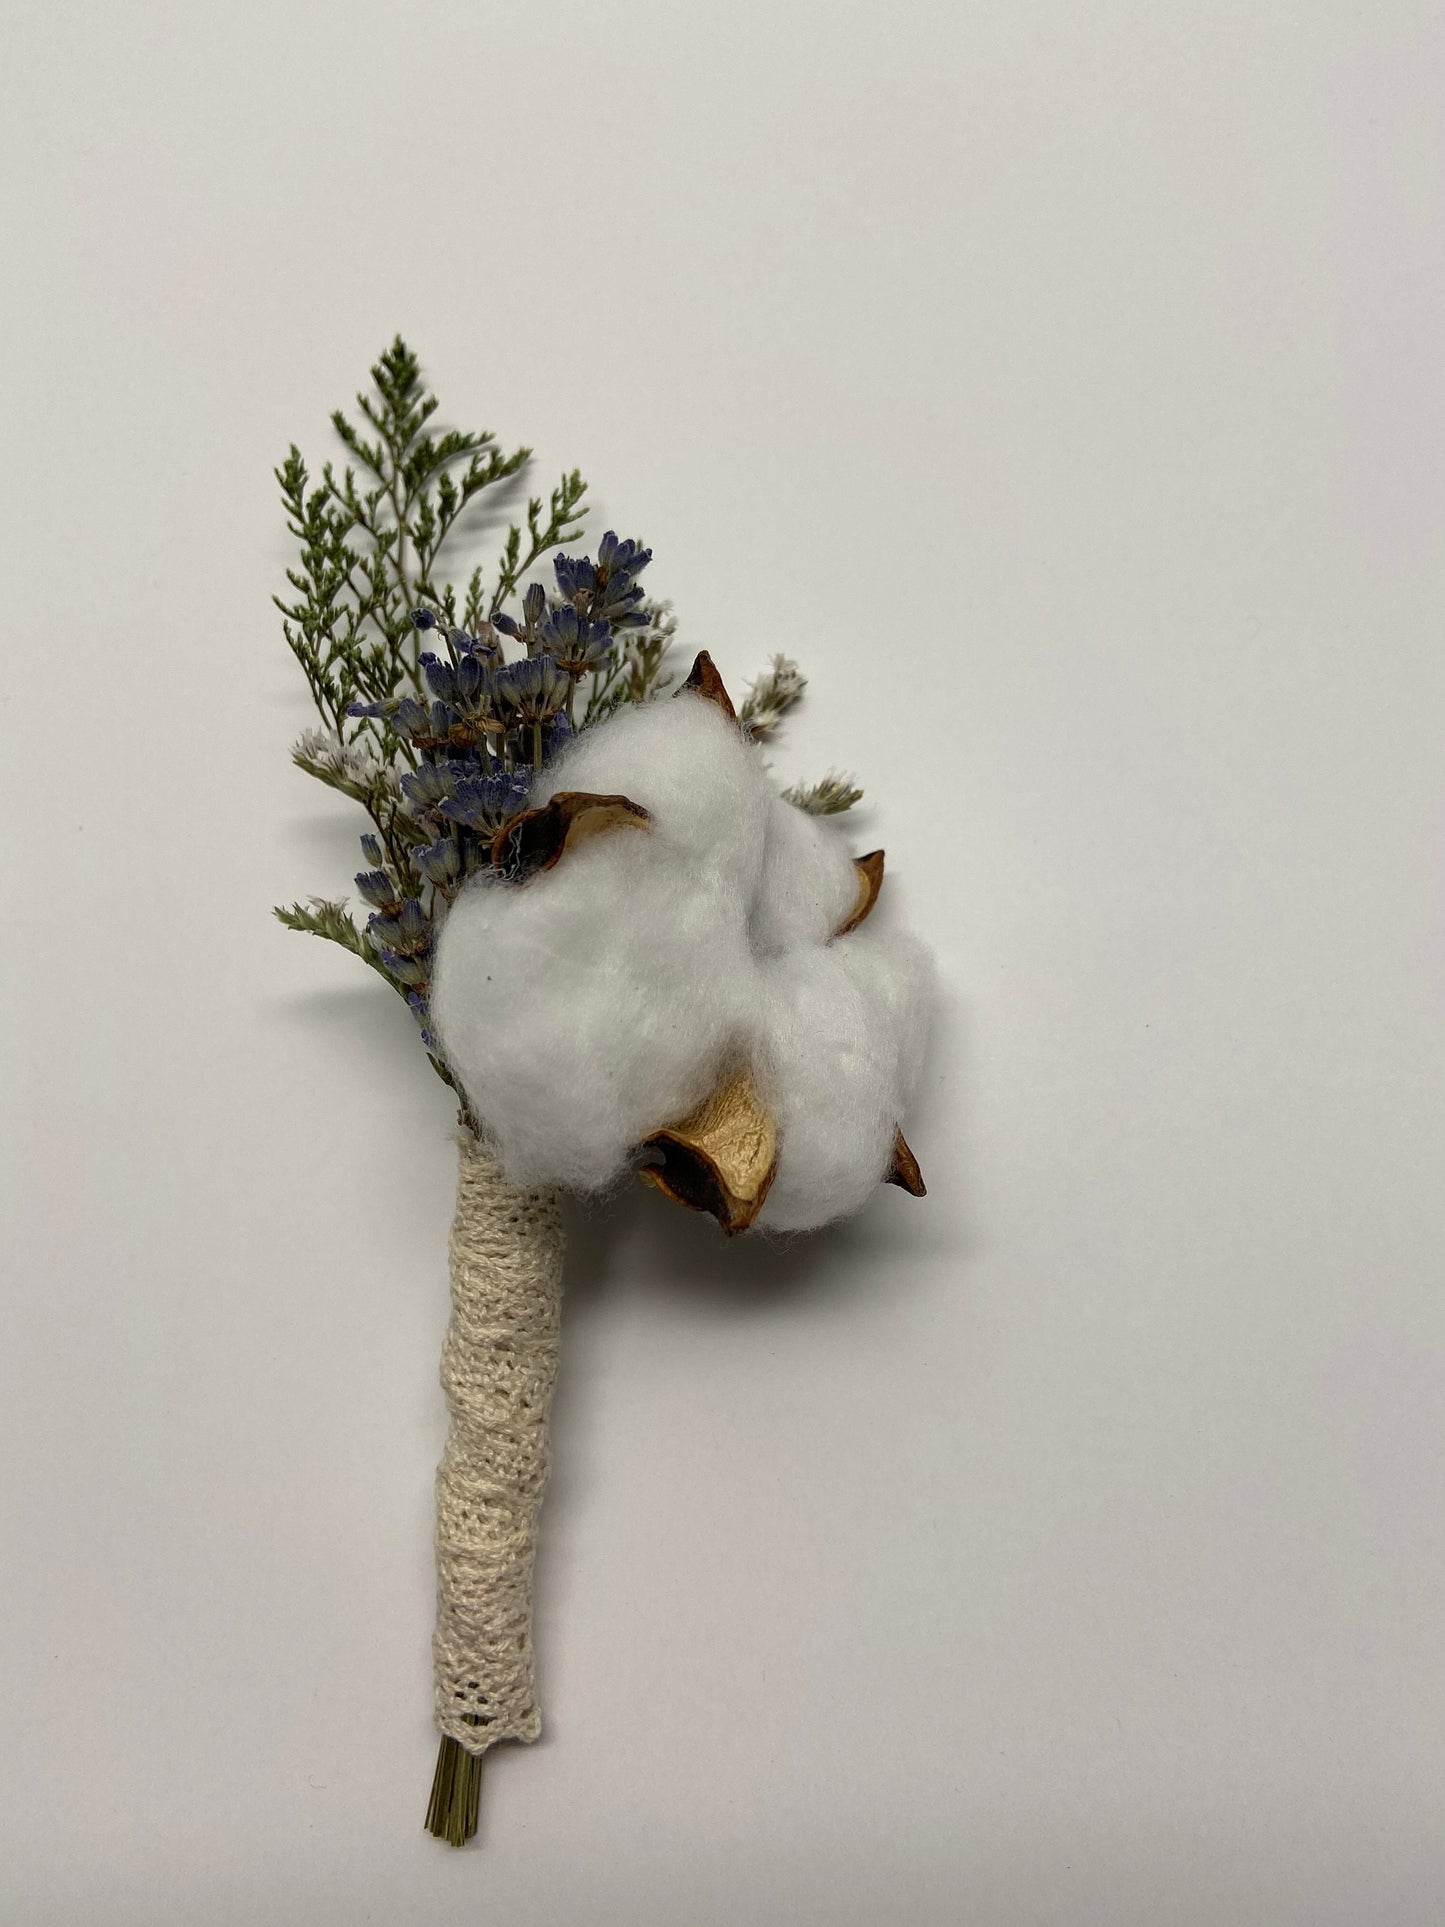 Cotton Wedding Boutonniere, Dried flowers, Preserved, Wedding Accessory, Rustic Wedding, Simplicity, Simple, Neutral